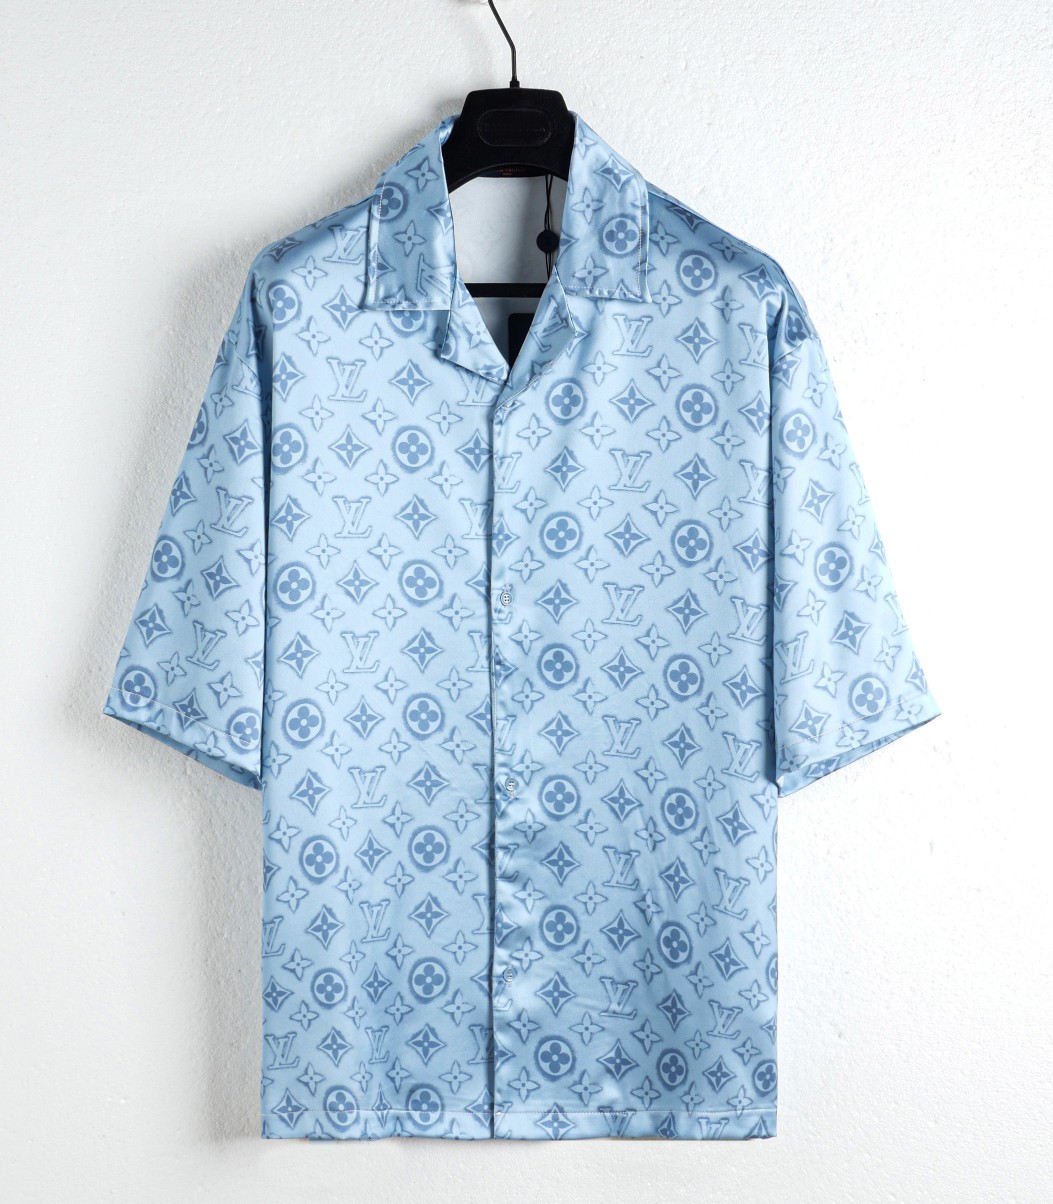 Louis Vuitton Clothing Shirts & Blouses Good Quality Replica
 Blue Grey White Printing Summer Collection